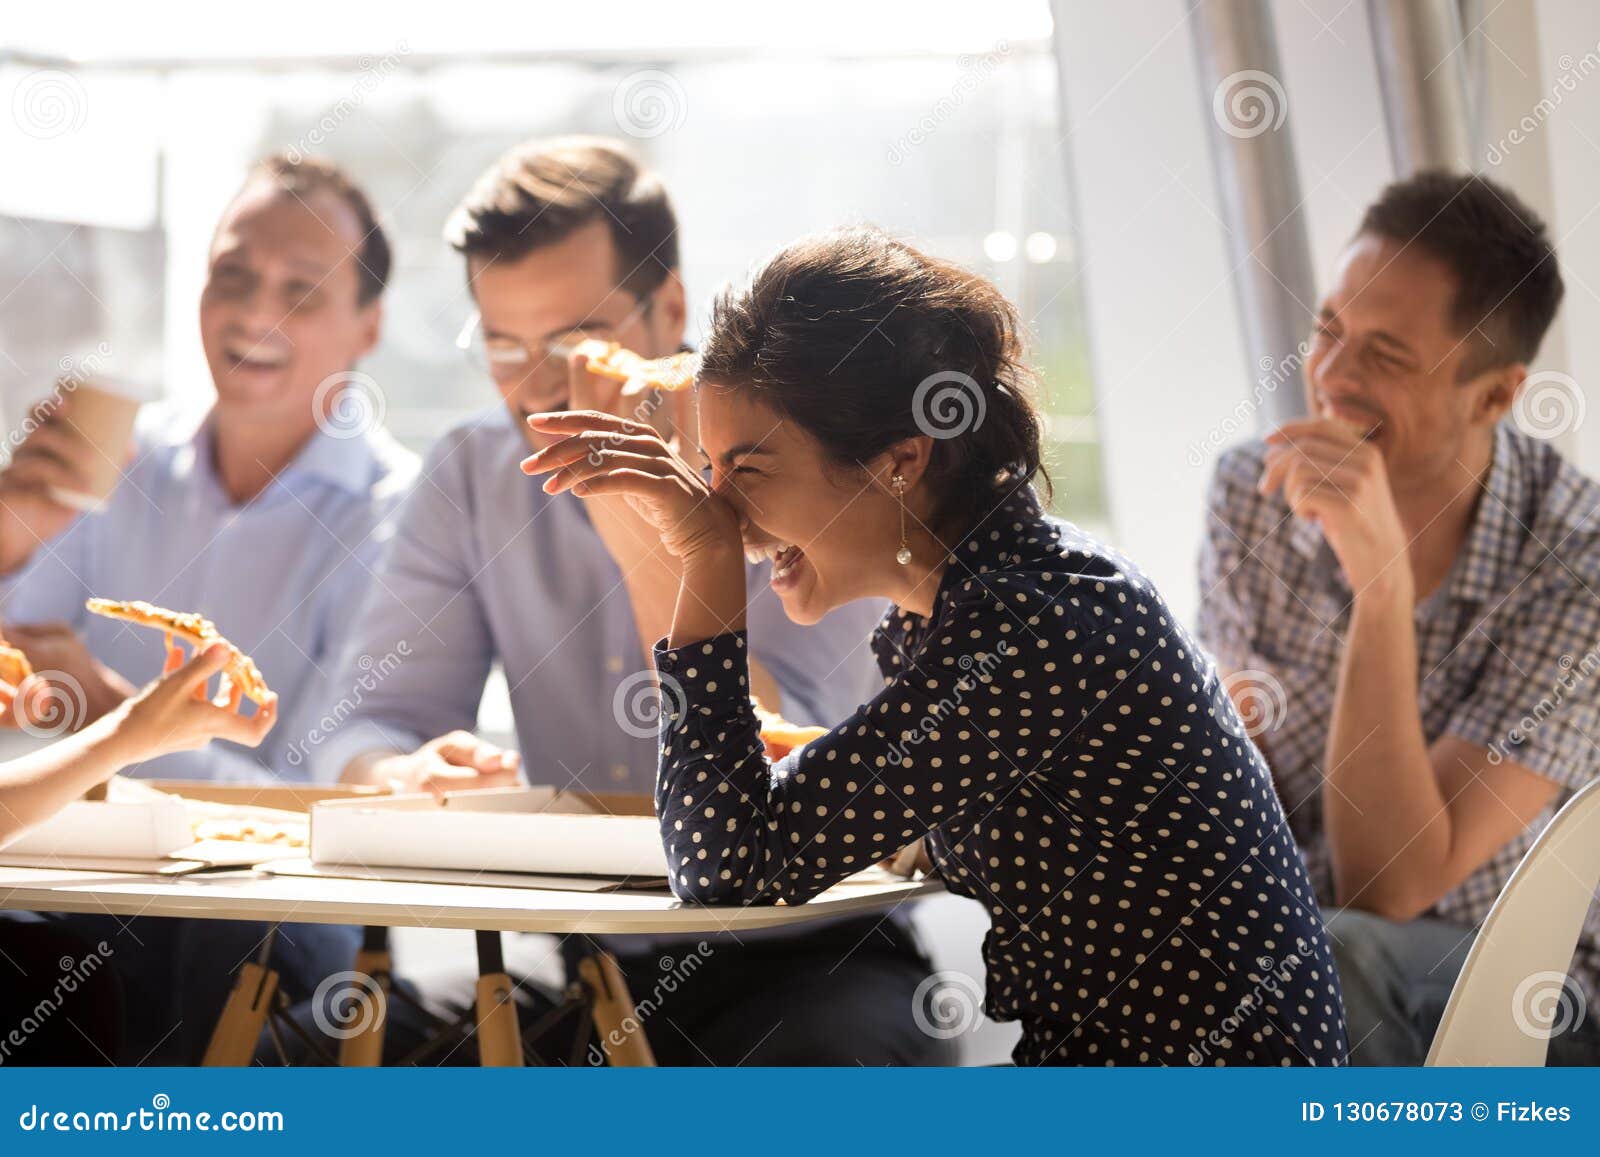 indian woman laughing eating pizza with diverse coworkers in off